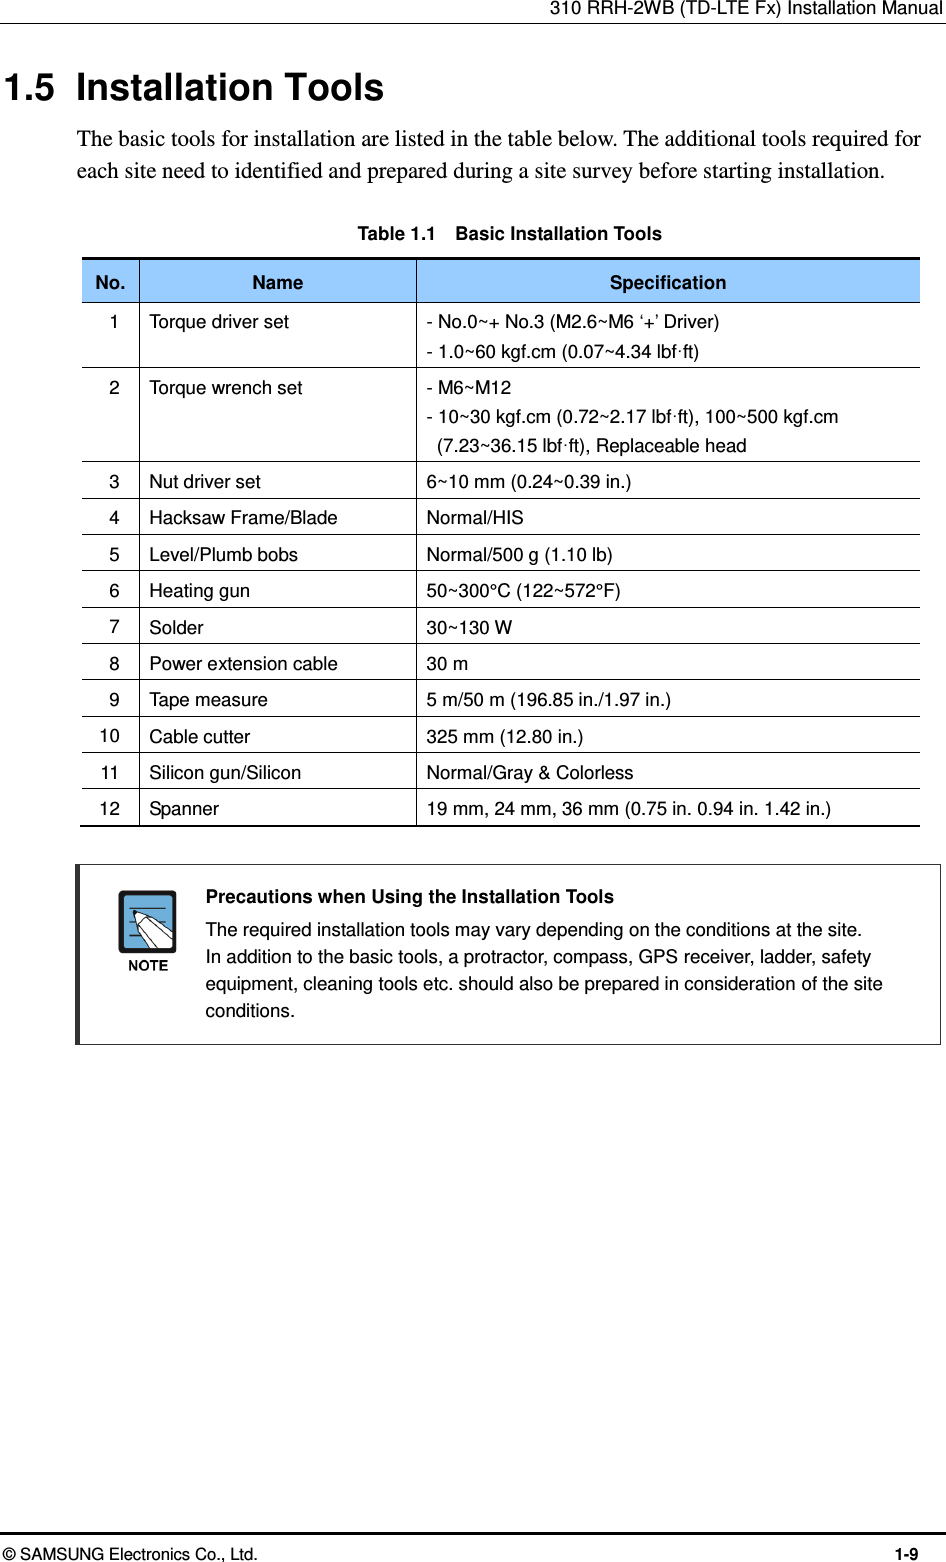 310 RRH-2WB (TD-LTE Fx) Installation Manual  © SAMSUNG Electronics Co., Ltd.  1-9 1.5  Installation Tools The basic tools for installation are listed in the table below. The additional tools required for each site need to identified and prepared during a site survey before starting installation.  Table 1.1    Basic Installation Tools No. Name Specification 1 Torque driver set - No.0~+ No.3 (M2.6~M6 ‘+’ Driver) - 1.0~60 kgf.cm (0.07~4.34 lbf·ft) 2 Torque wrench set - M6~M12 - 10~30 kgf.cm (0.72~2.17 lbf·ft), 100~500 kgf.cm (7.23~36.15 lbf·ft), Replaceable head 3 Nut driver set 6~10 mm (0.24~0.39 in.) 4 Hacksaw Frame/Blade Normal/HIS 5 Level/Plumb bobs Normal/500 g (1.10 lb) 6 Heating gun 50~300°C (122~572°F) 7 Solder 30~130 W   8 Power extension cable 30 m 9 Tape measure 5 m/50 m (196.85 in./1.97 in.) 10 Cable cutter 325 mm (12.80 in.) 11 Silicon gun/Silicon Normal/Gray &amp; Colorless   12 Spanner 19 mm, 24 mm, 36 mm (0.75 in. 0.94 in. 1.42 in.)   Precautions when Using the Installation Tools   The required installation tools may vary depending on the conditions at the site.   In addition to the basic tools, a protractor, compass, GPS receiver, ladder, safety equipment, cleaning tools etc. should also be prepared in consideration of the site conditions.      